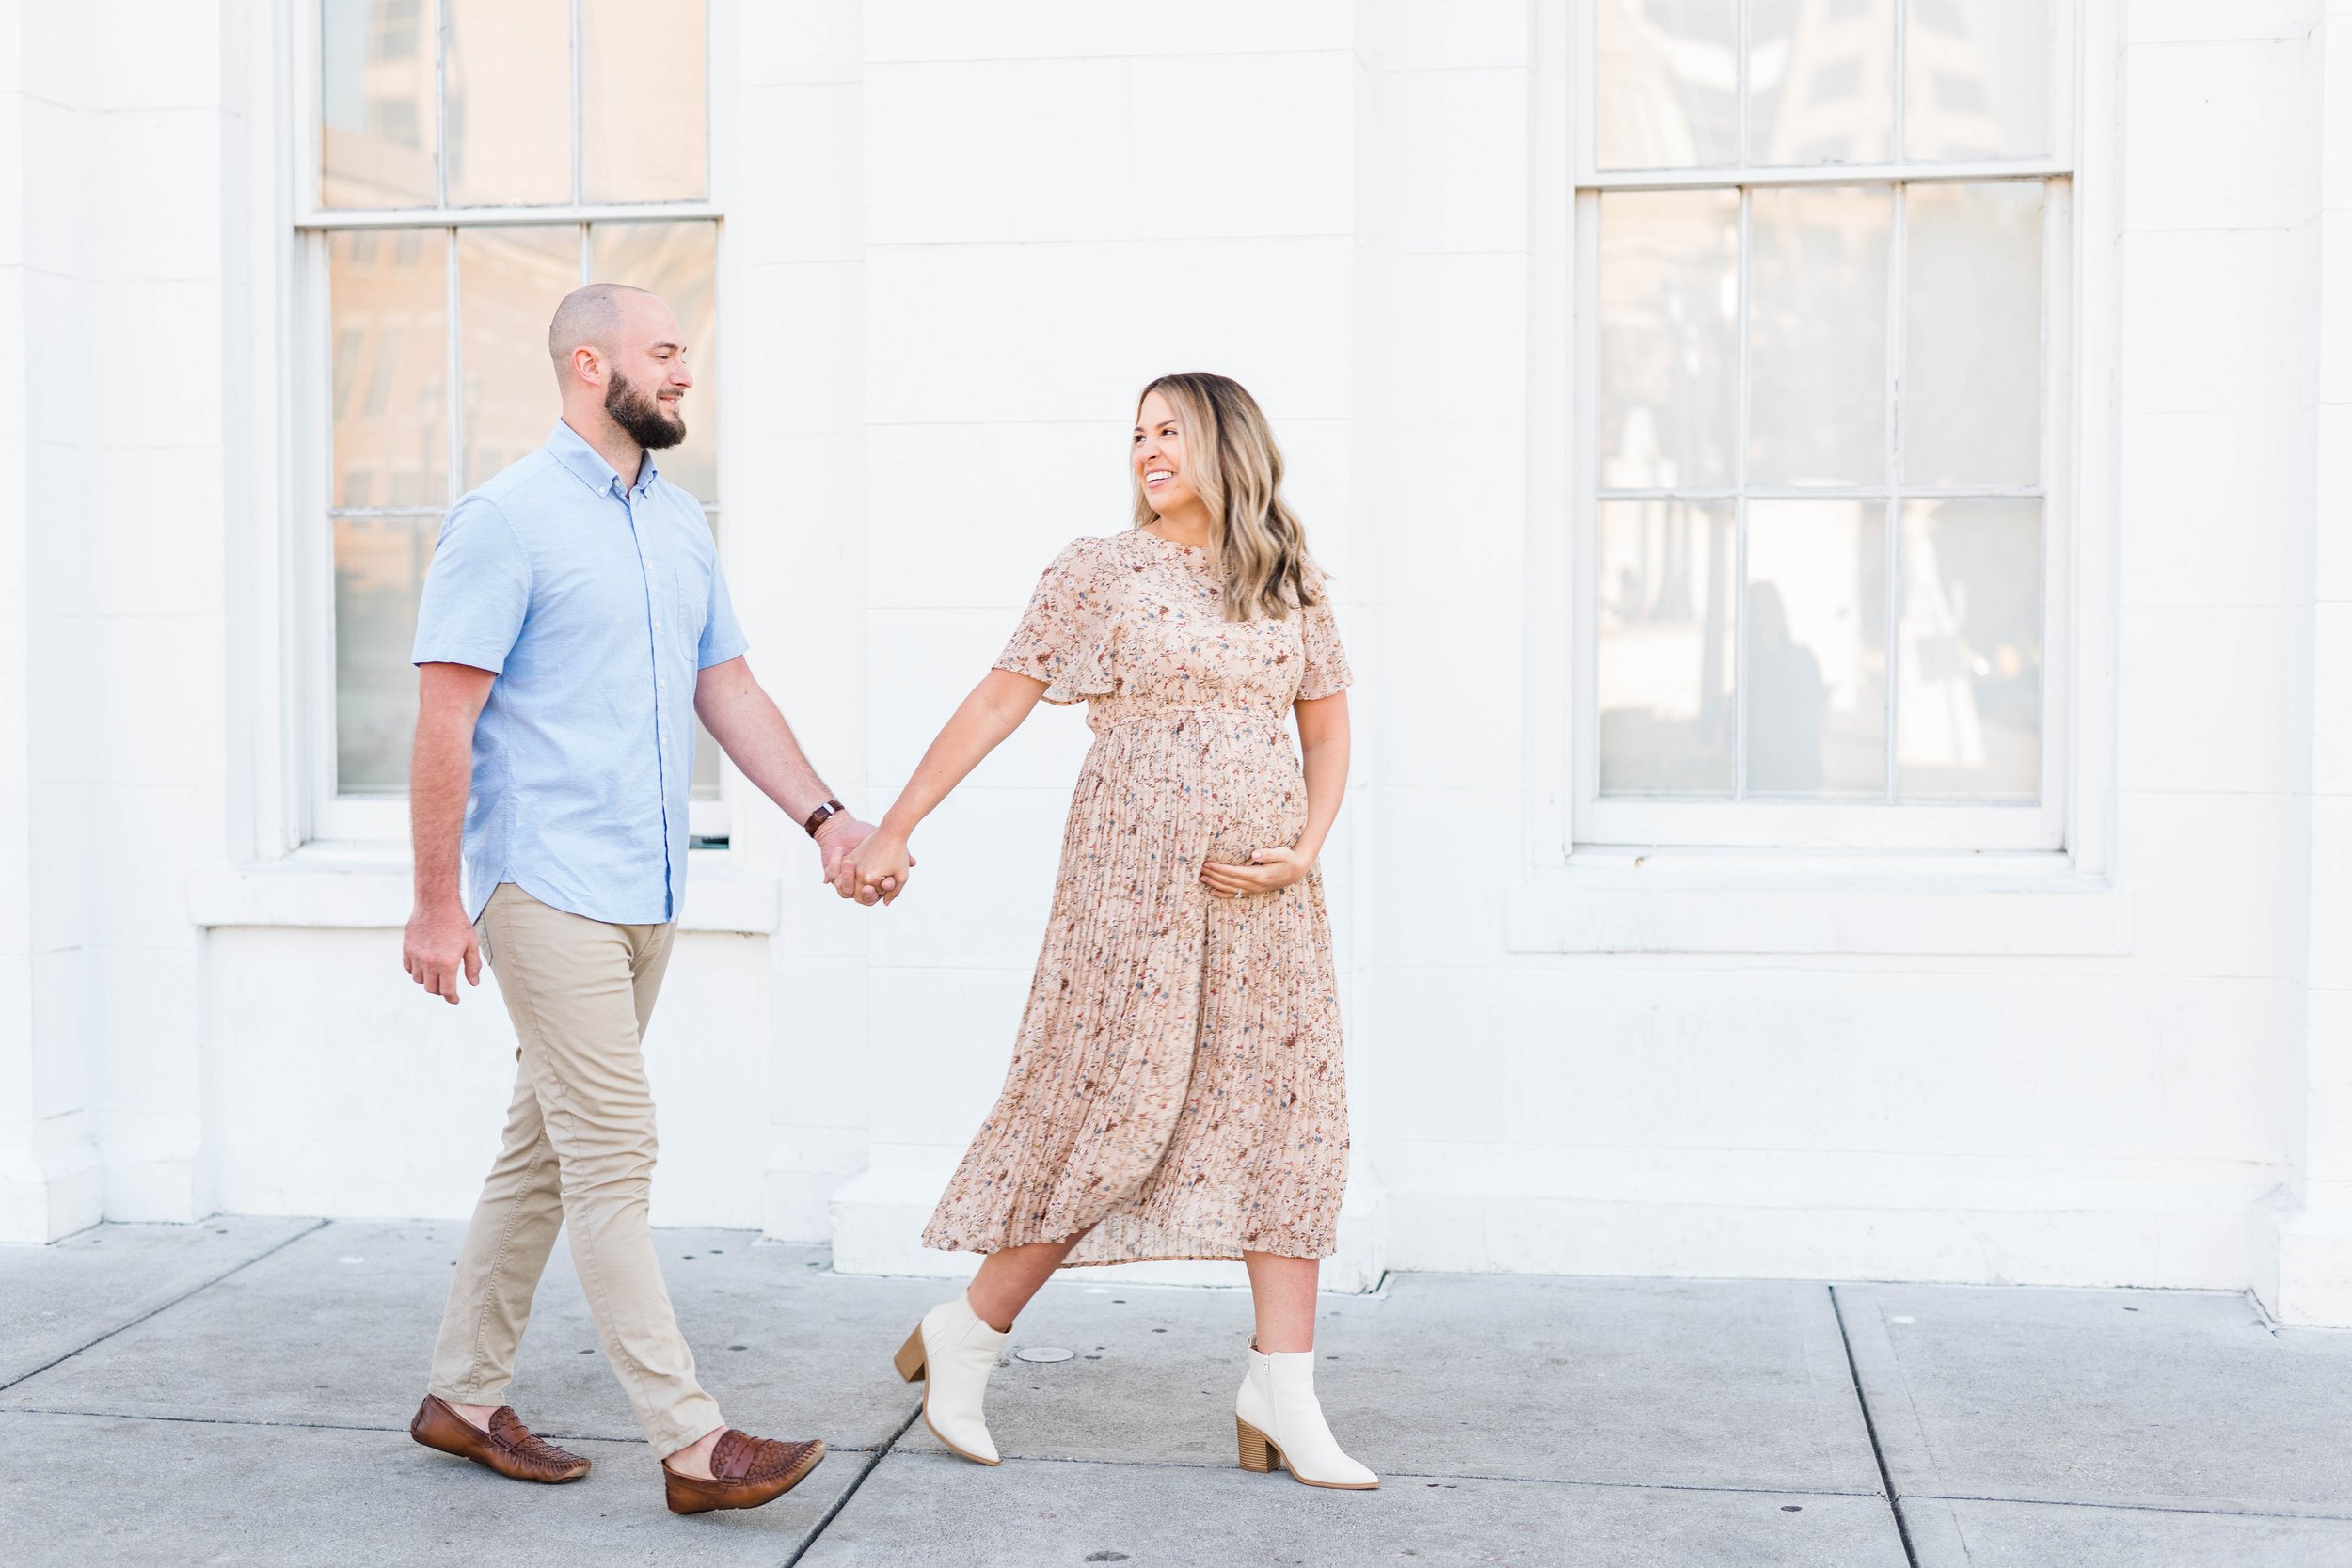 Downtown Mobile Alabama (Fort Conde / History Museum) Maternity Session Photoshoot Photographed by Kristen Marcus Photography